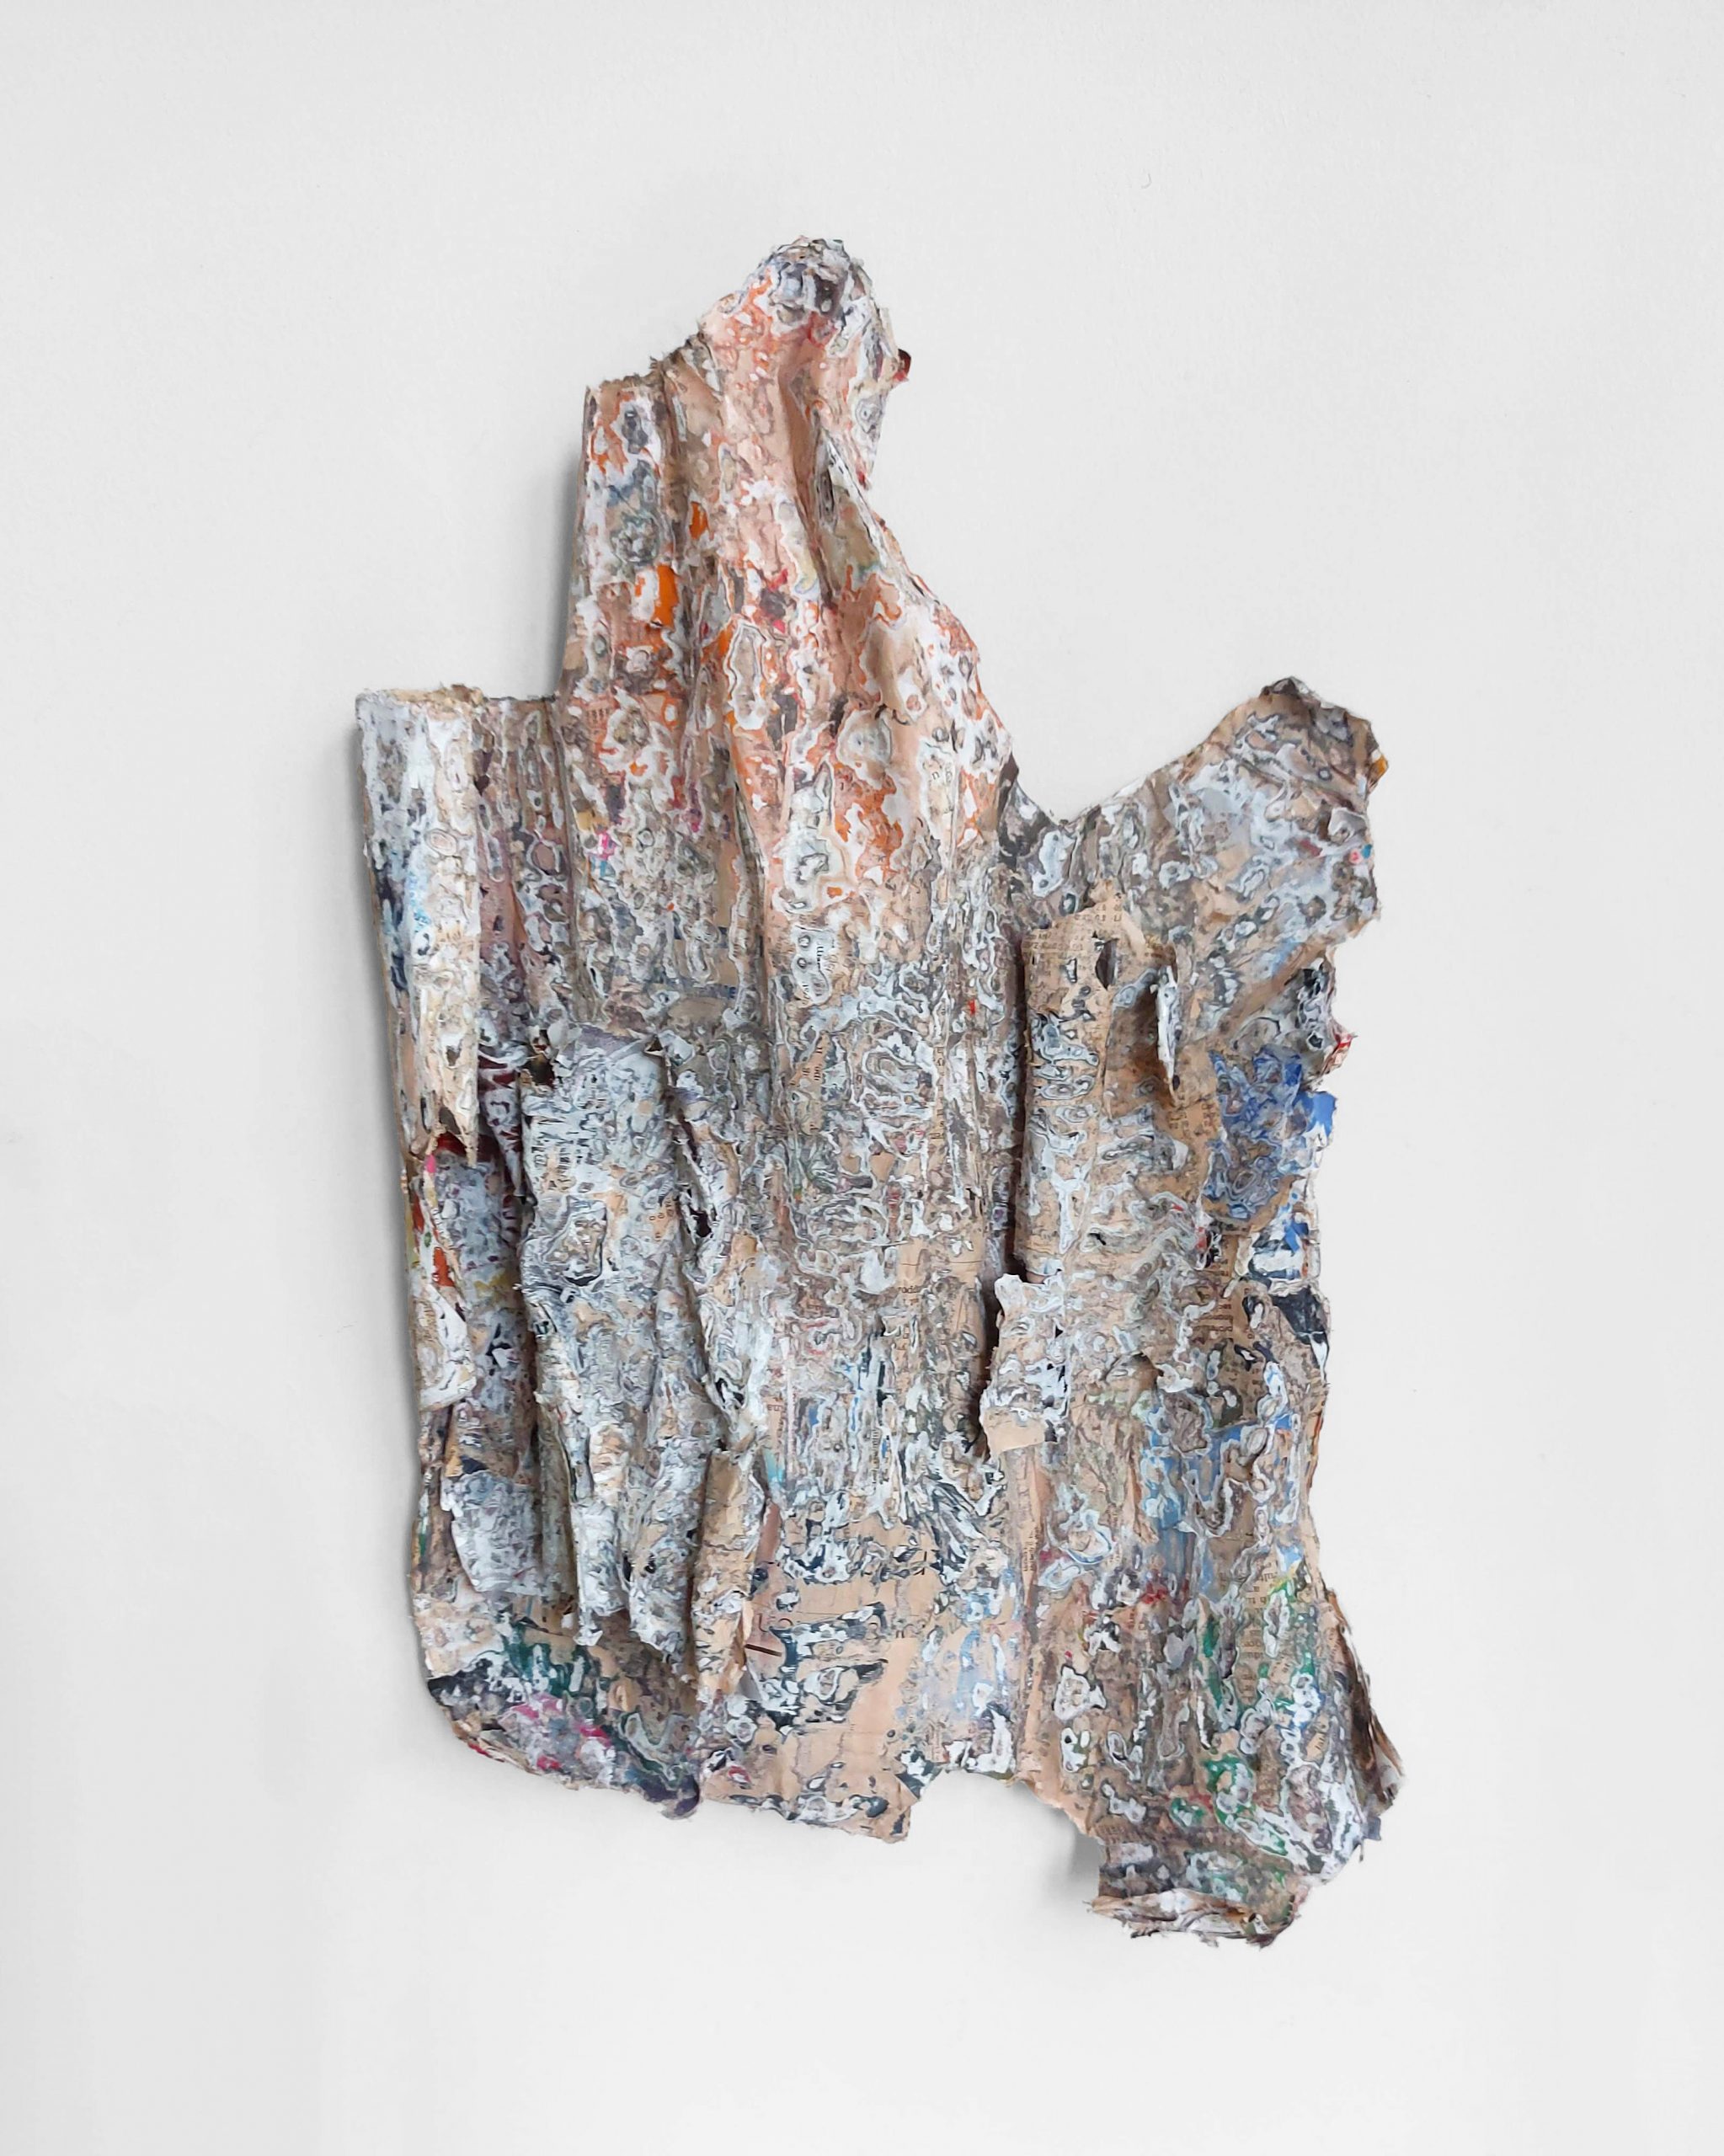 Re-imagined fragments of nature. Re-created bark series by Anna Bower